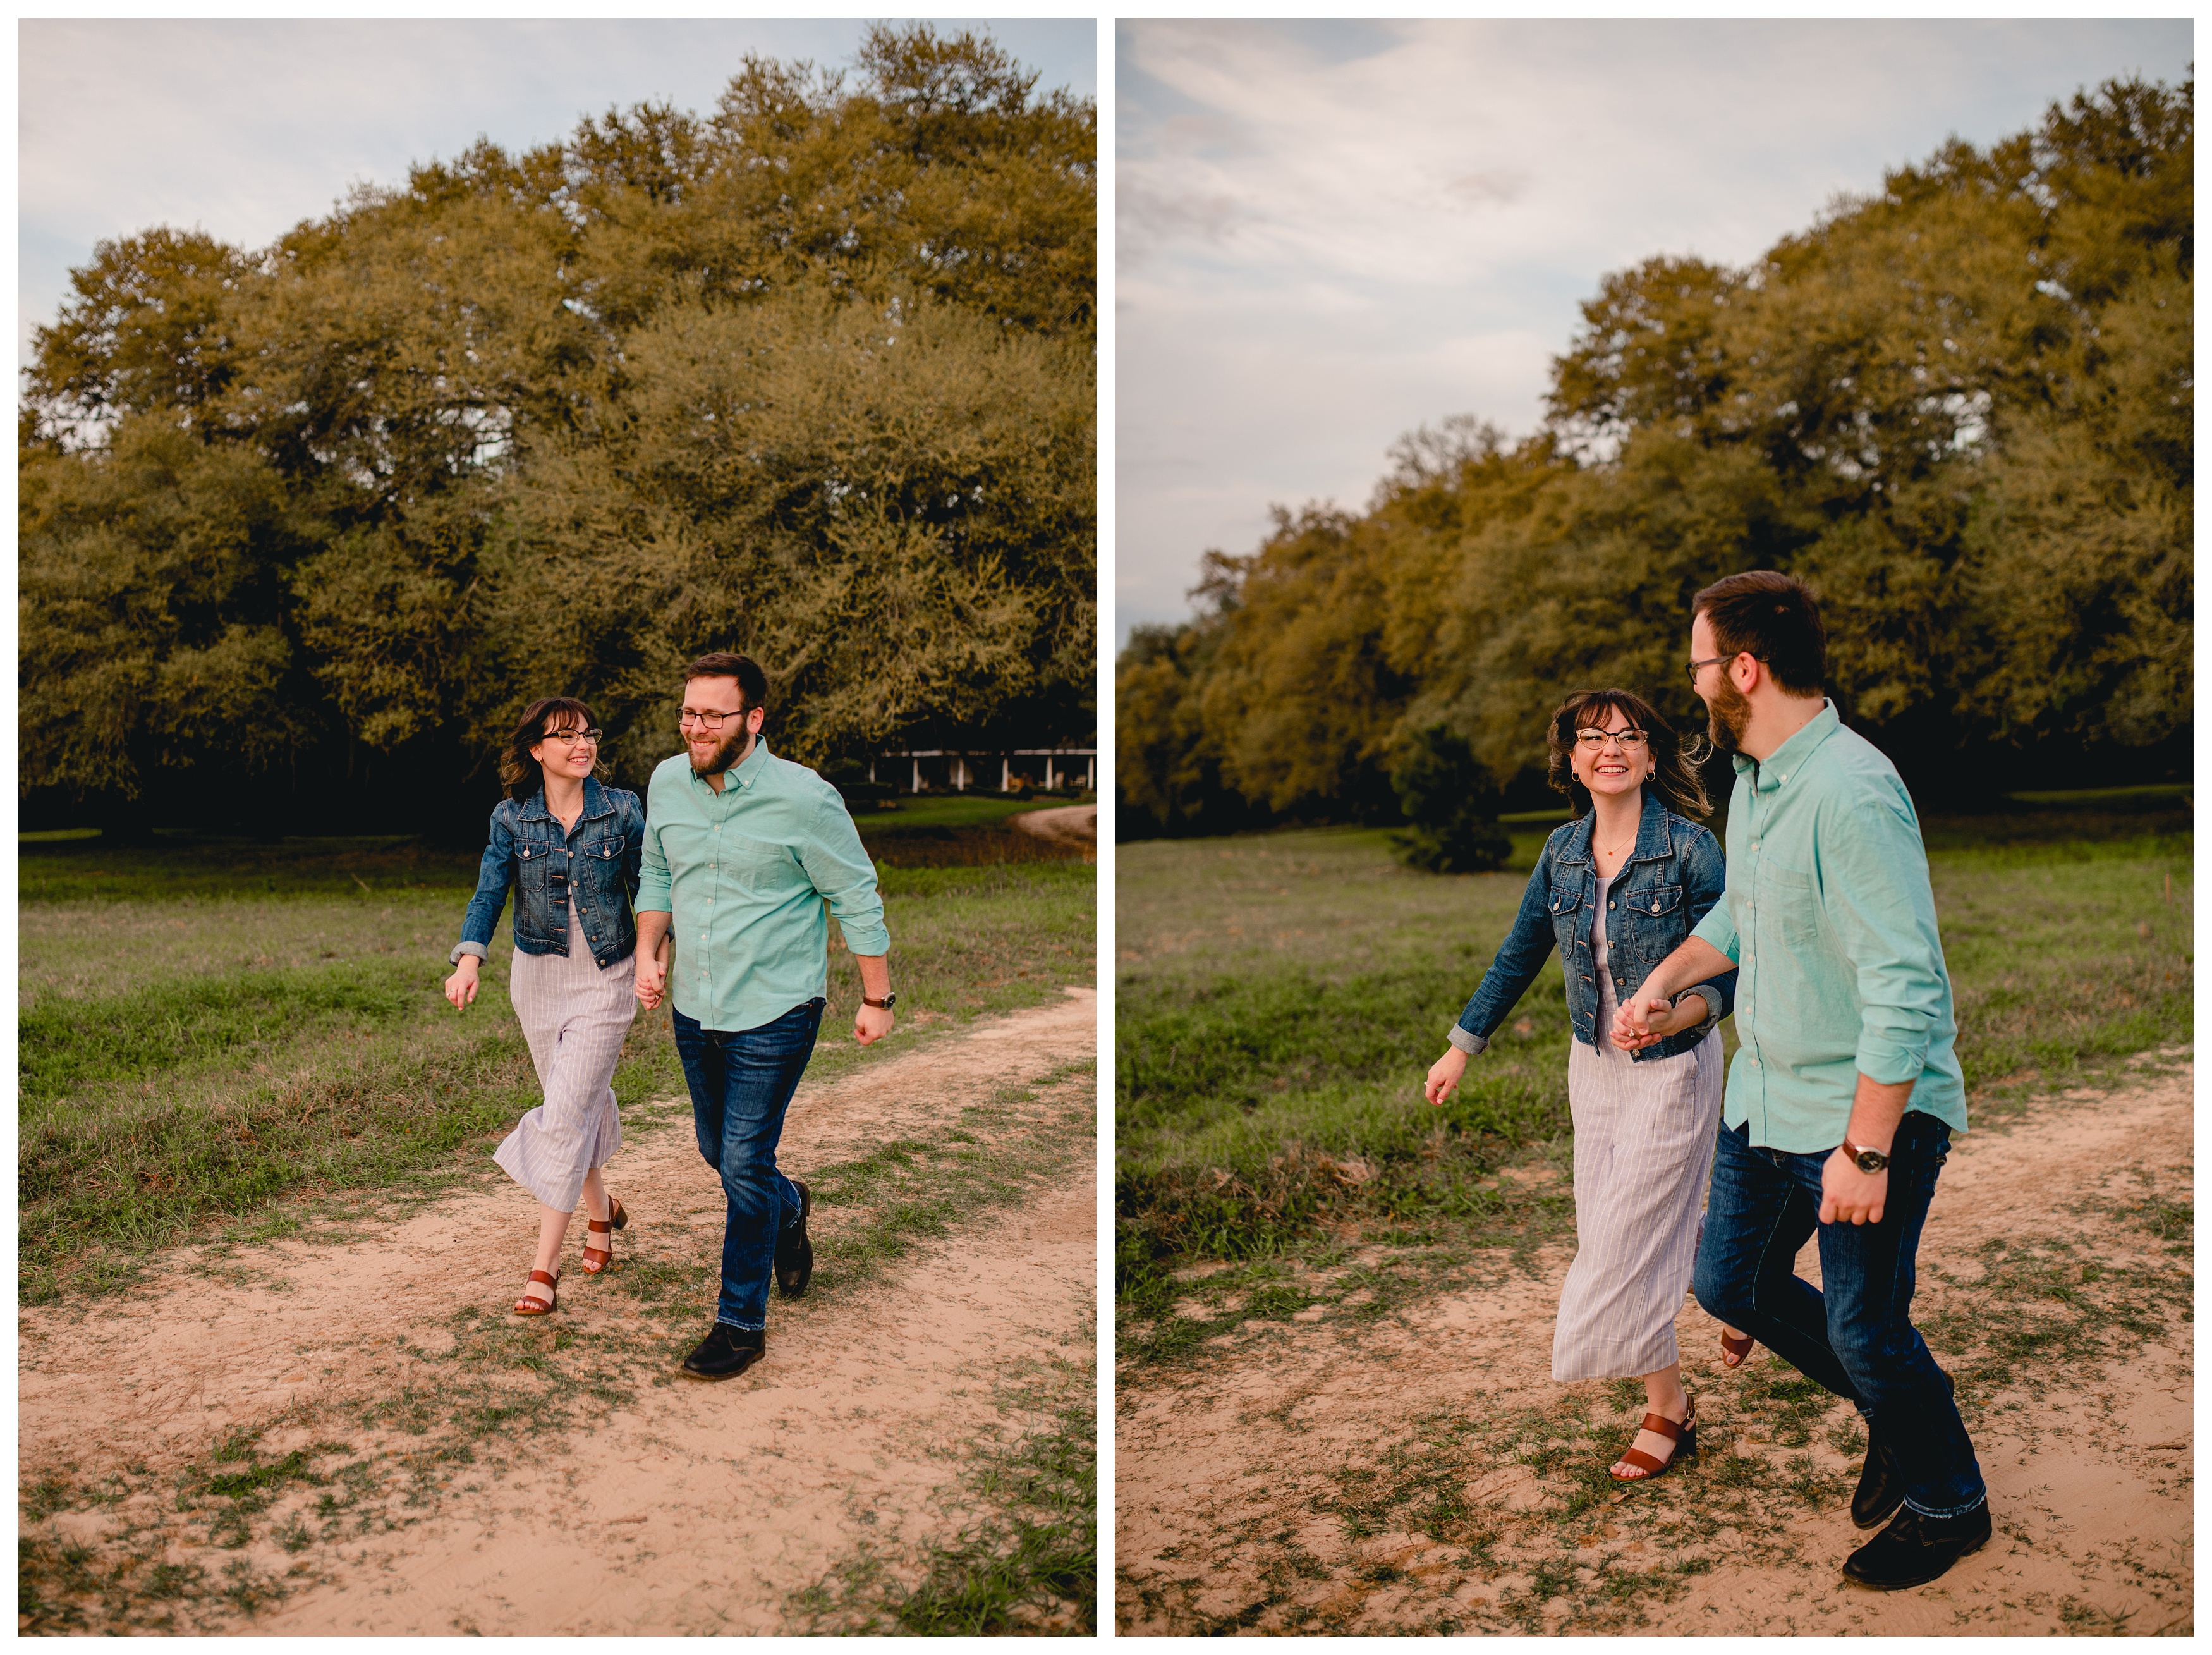 Fun and naturally posed engagement session with prompts to encourage interaction. Tallahassee photographer, Shelly Williams Photography